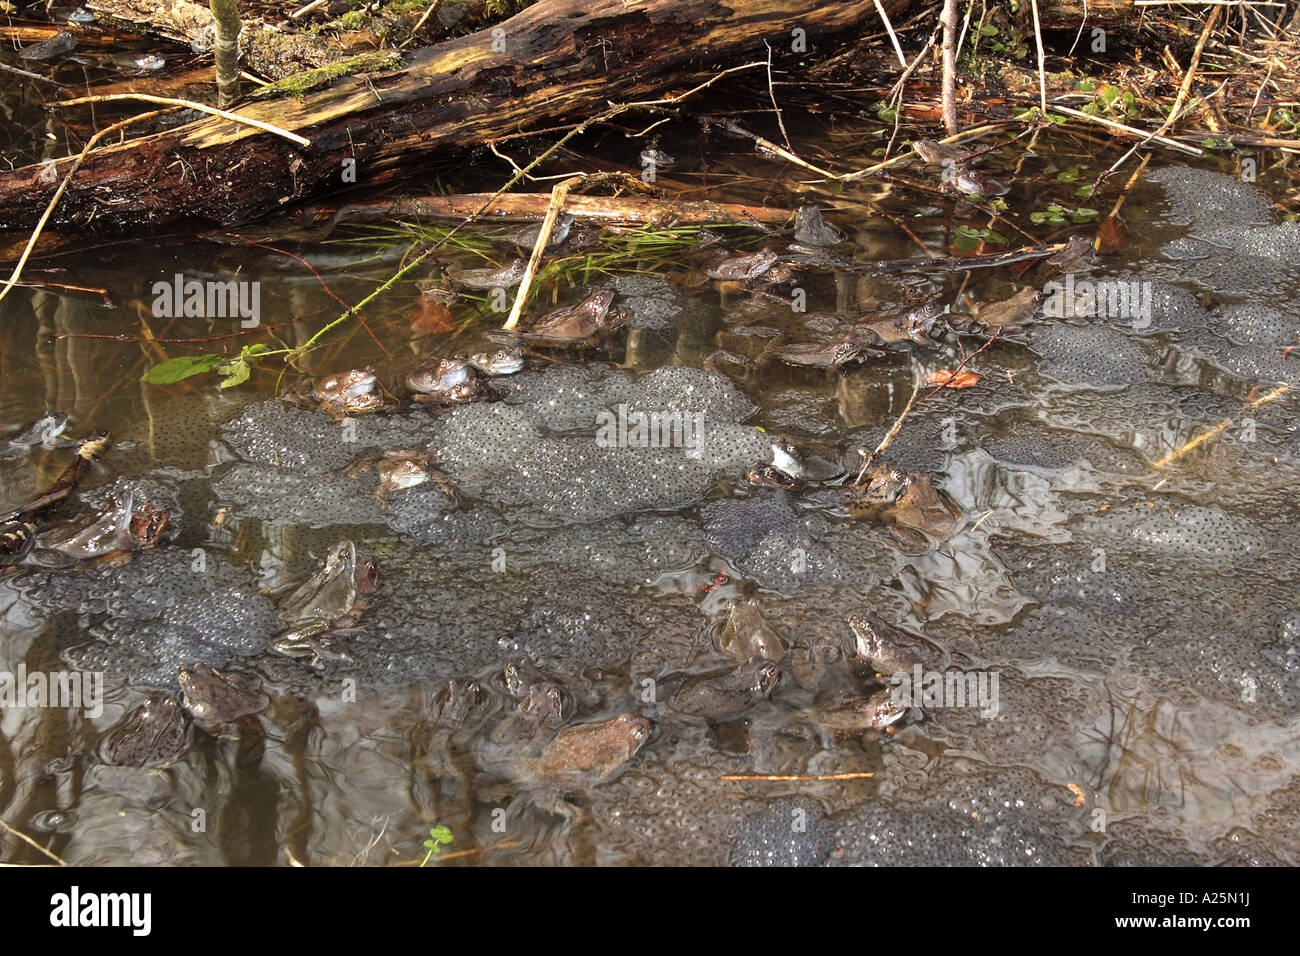 common frog, grass frog (Rana temporaria), many spawn clumps in a pond, Germany, Bavaria Stock Photo